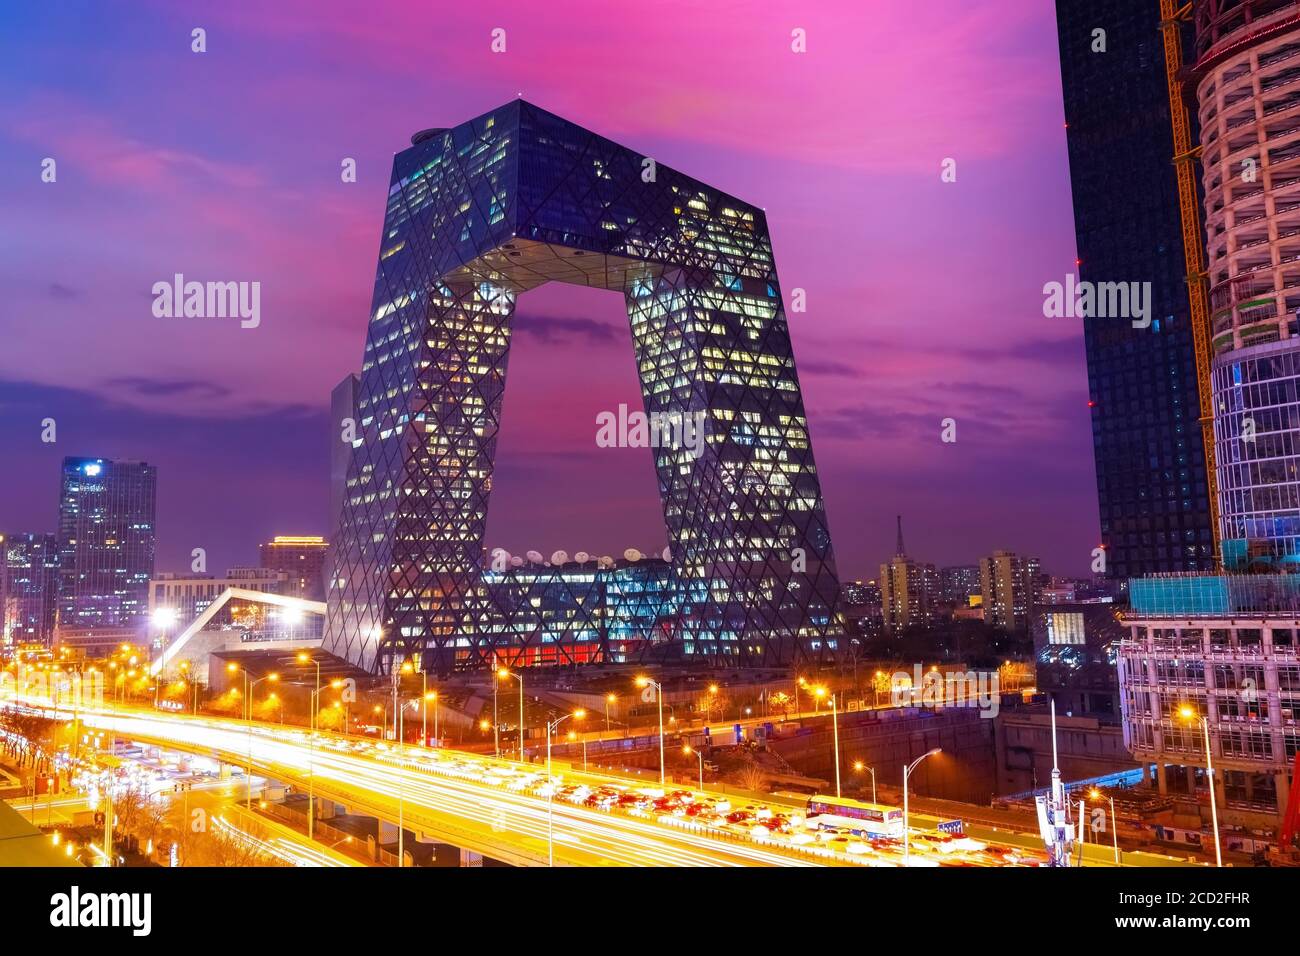 Beijing, China - Jan 12 2020: The CCTV Headquarters on the CMG Guanghua Road Office Area, completed in May 2012, designed by Rem Koolhaas and Ole Sche Stock Photo